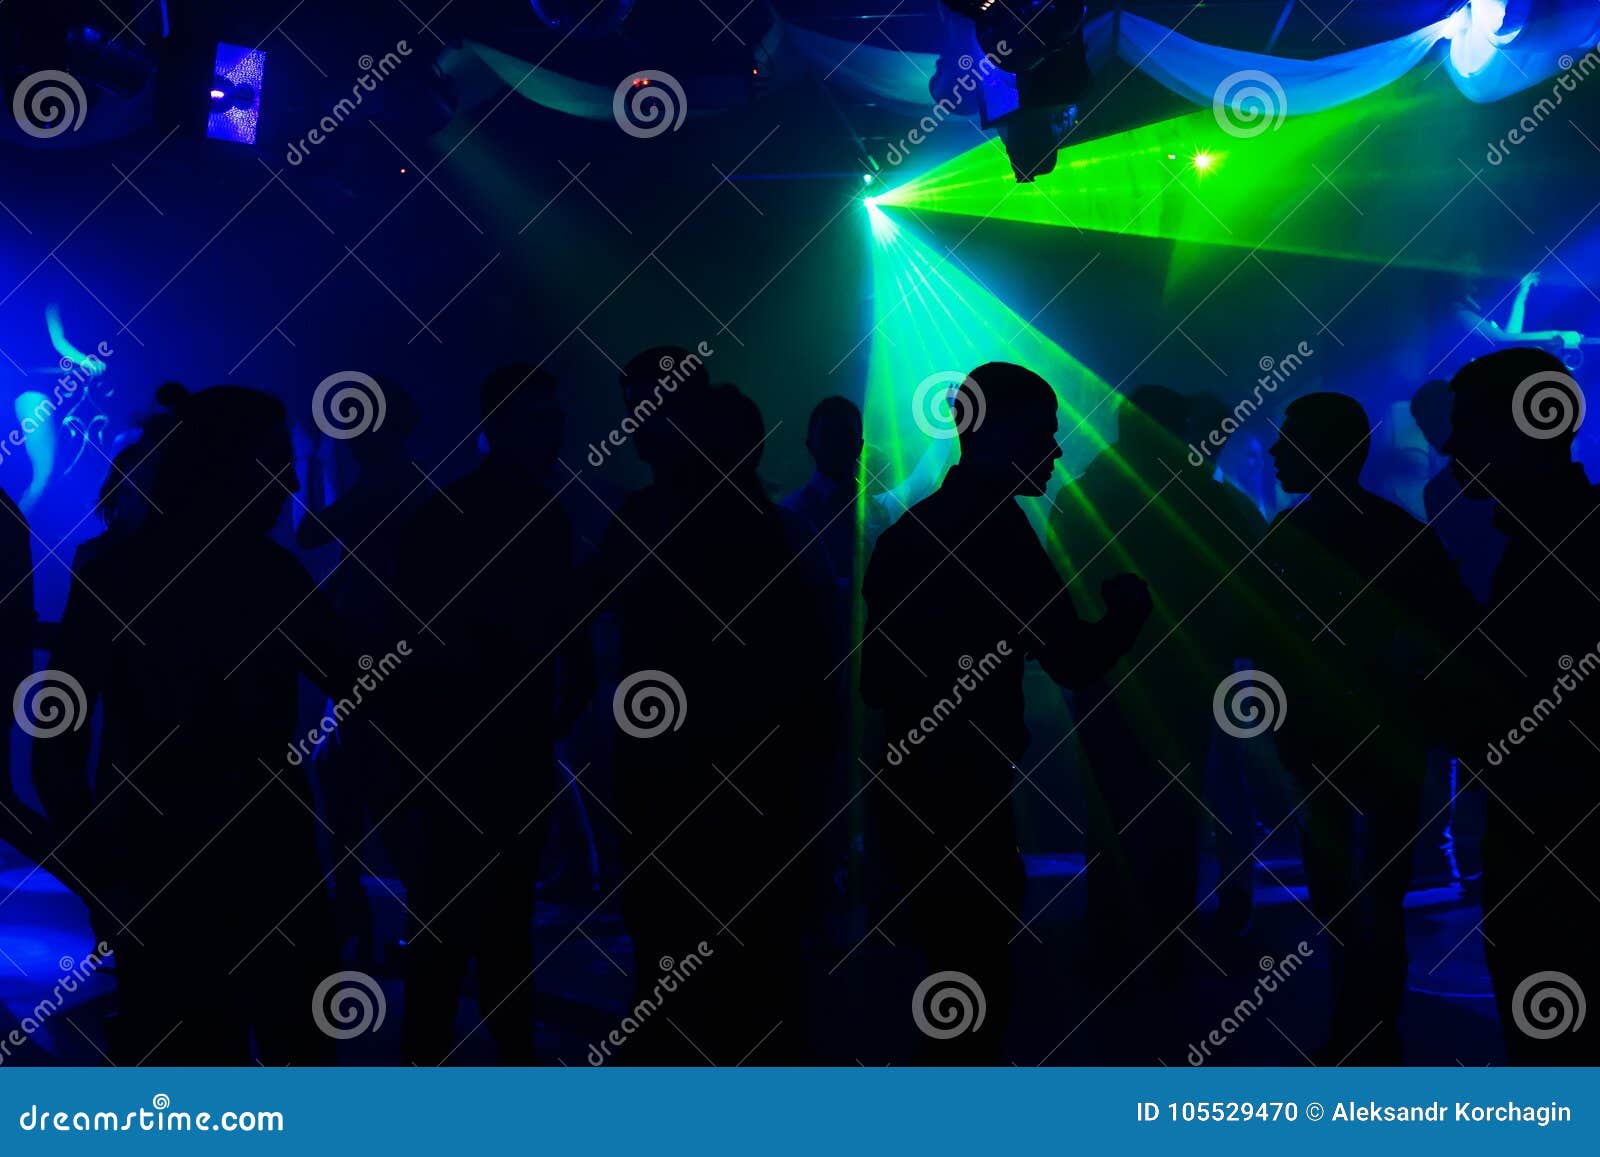 People silhouettes on the dance floor of a night club at the event under th...